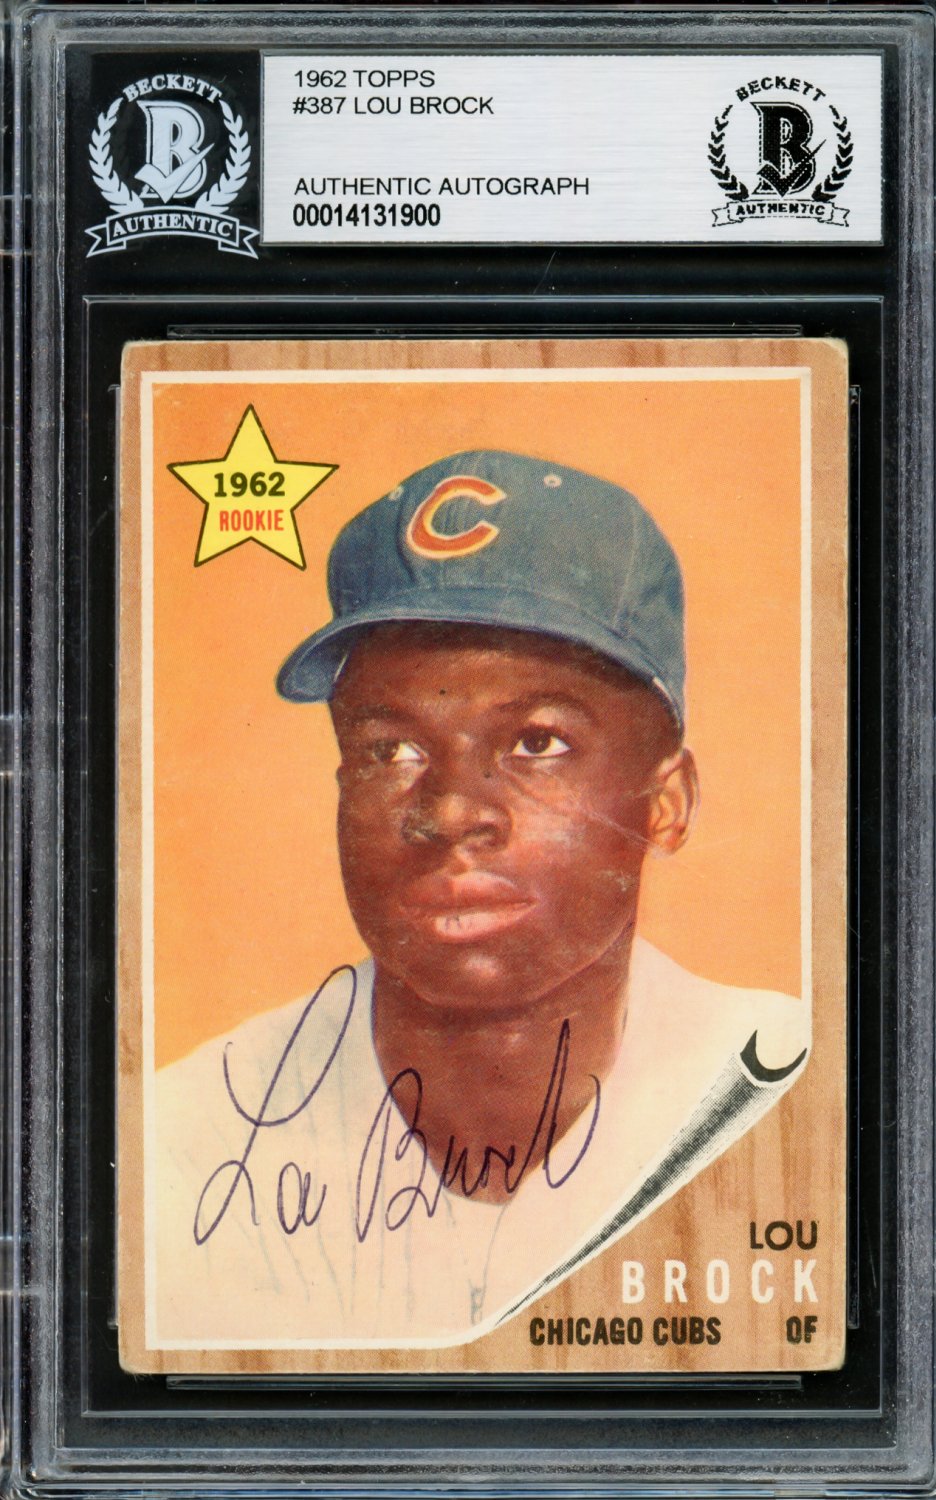 Lou Brock Autographed Signed 1962 Topps Rookie Card #387 Chicago